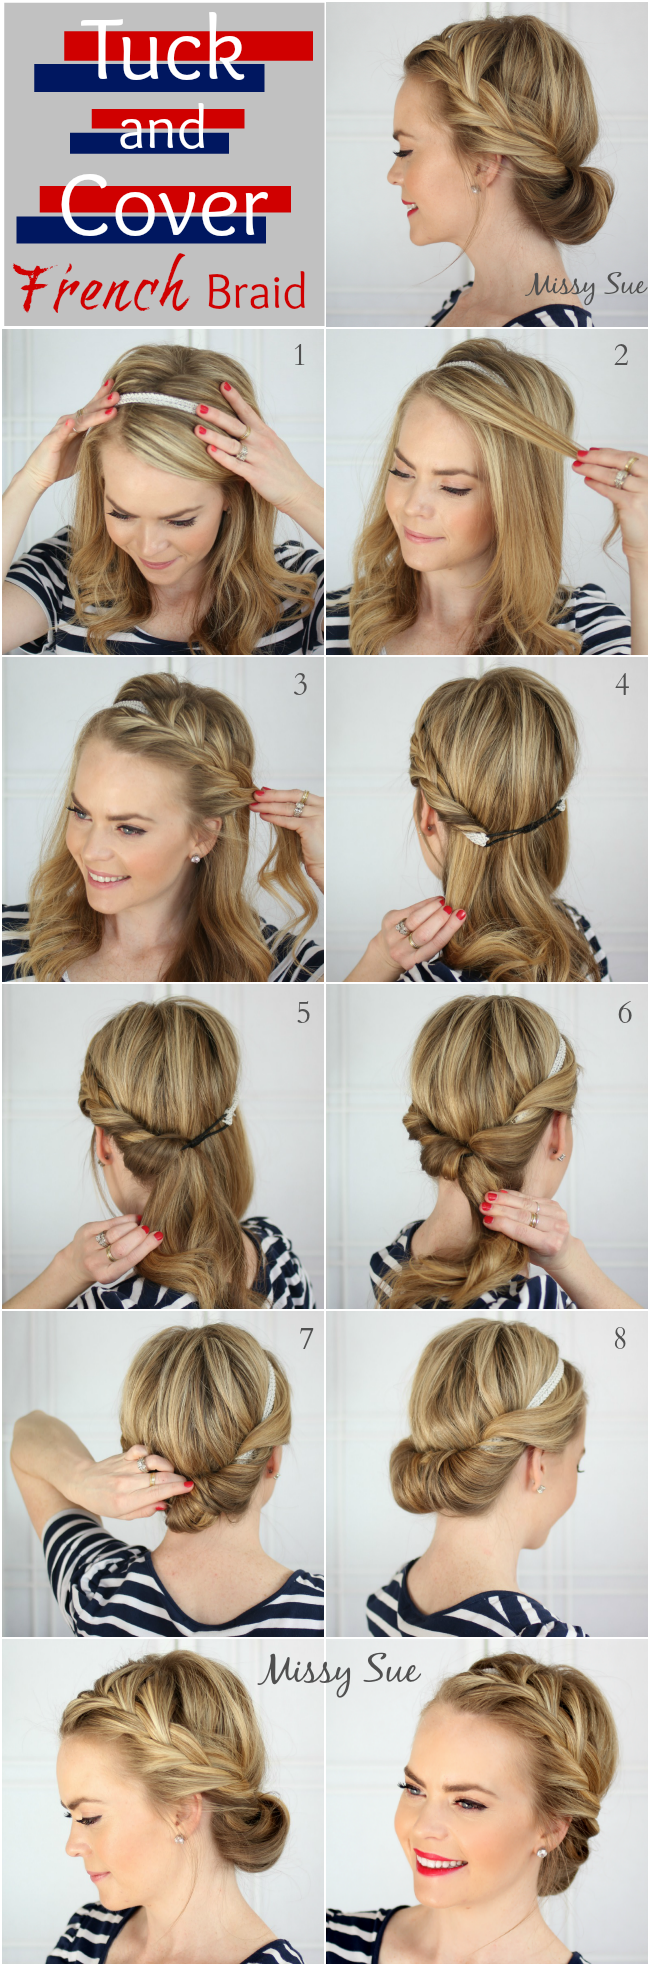 French Braid Updo Hairstyle